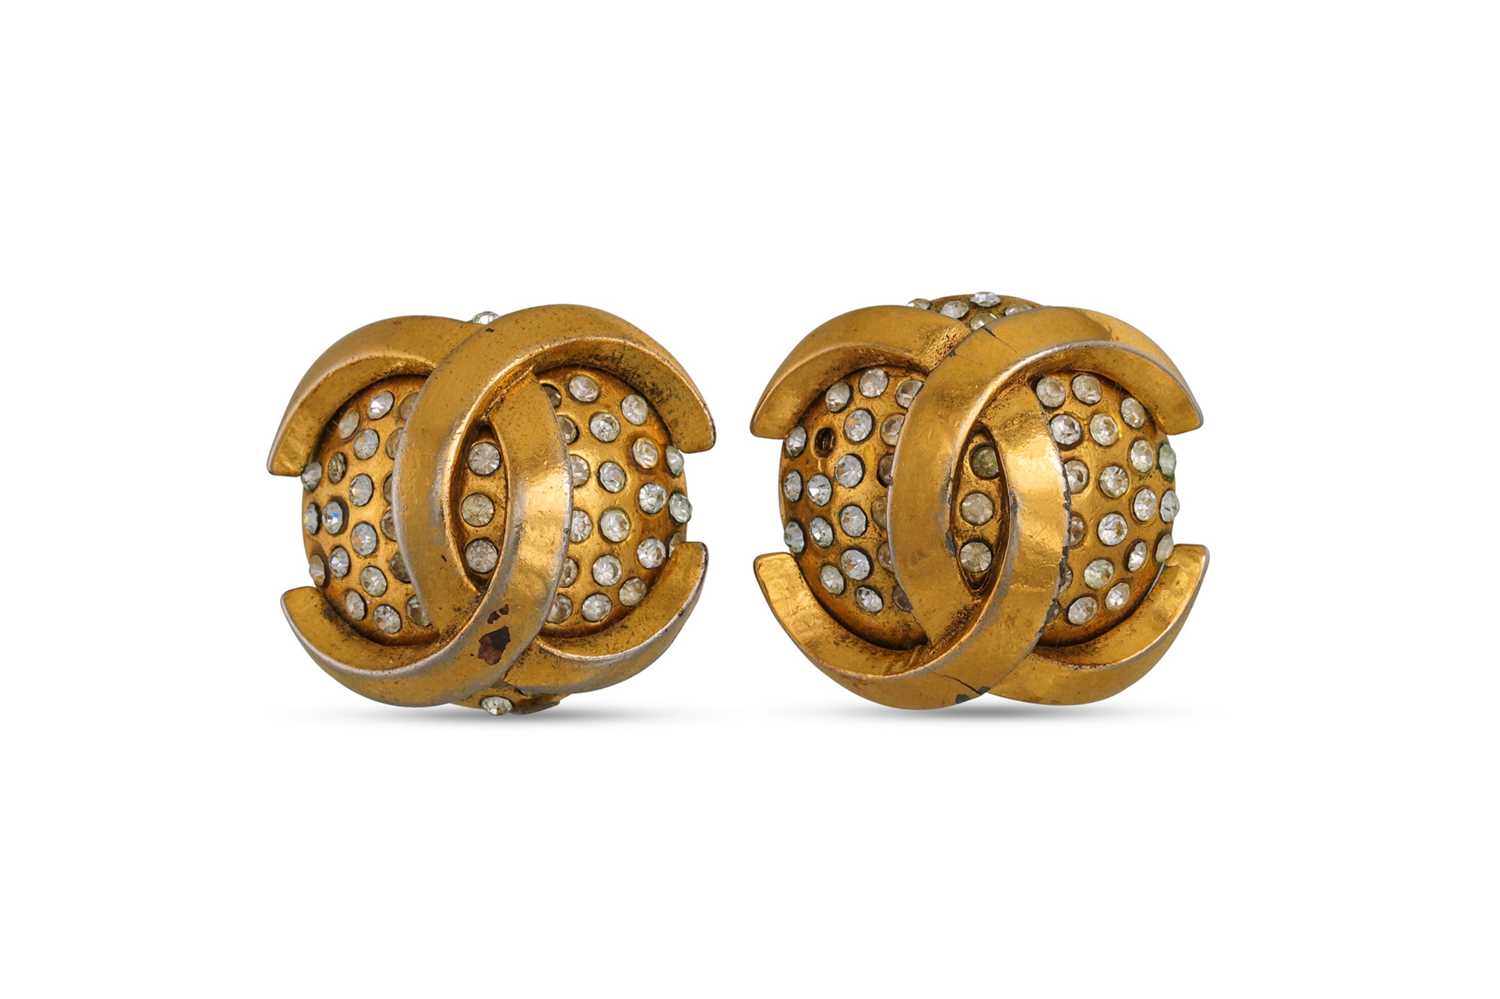 Lot 6 - A PAIR OF 1980s CHANEL 'DOUBLE C' EARRINGS